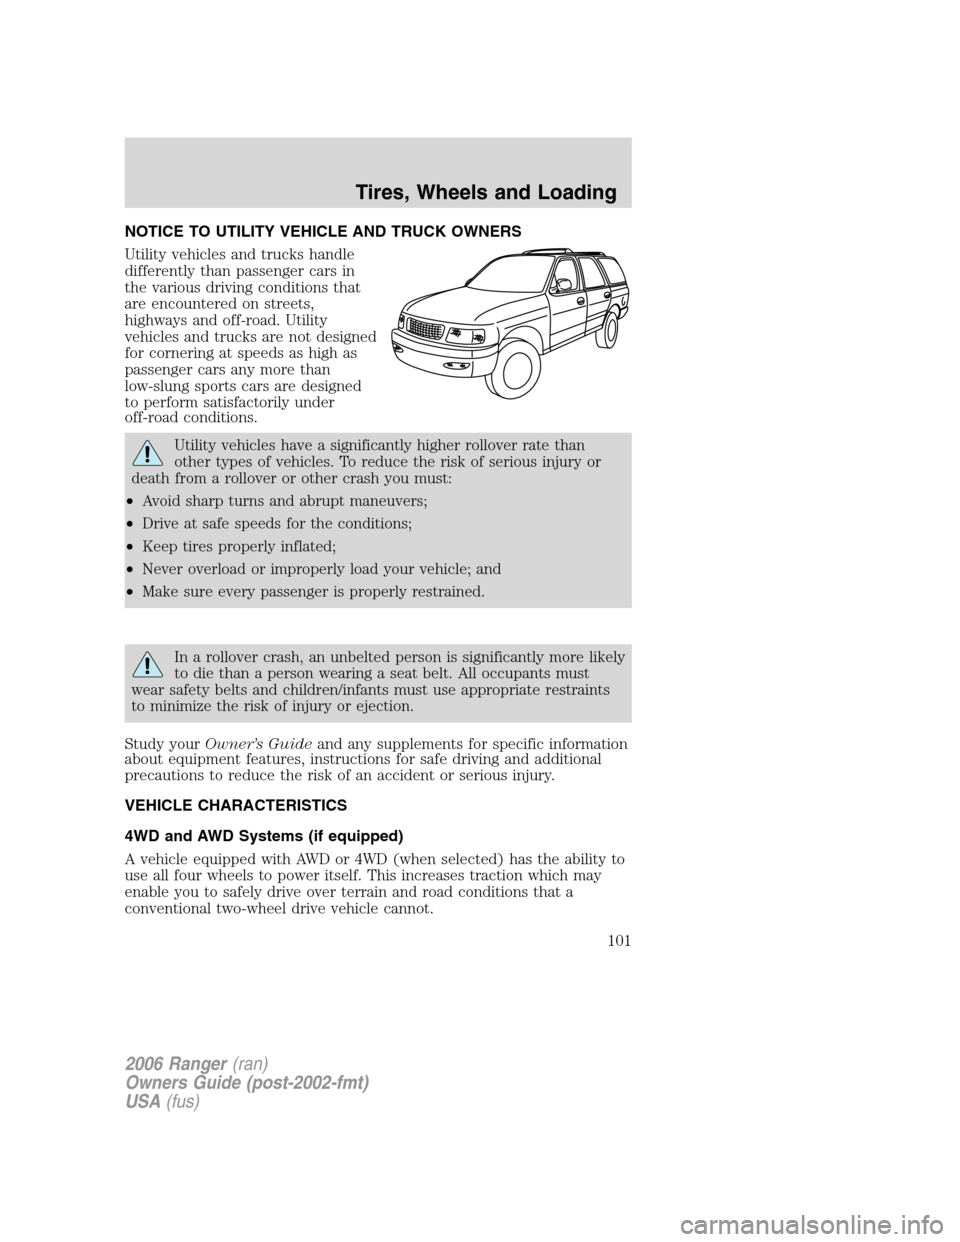 FORD RANGER 2006 2.G Owners Manual NOTICE TO UTILITY VEHICLE AND TRUCK OWNERS
Utility vehicles and trucks handle
differently than passenger cars in
the various driving conditions that
are encountered on streets,
highways and off-road. 